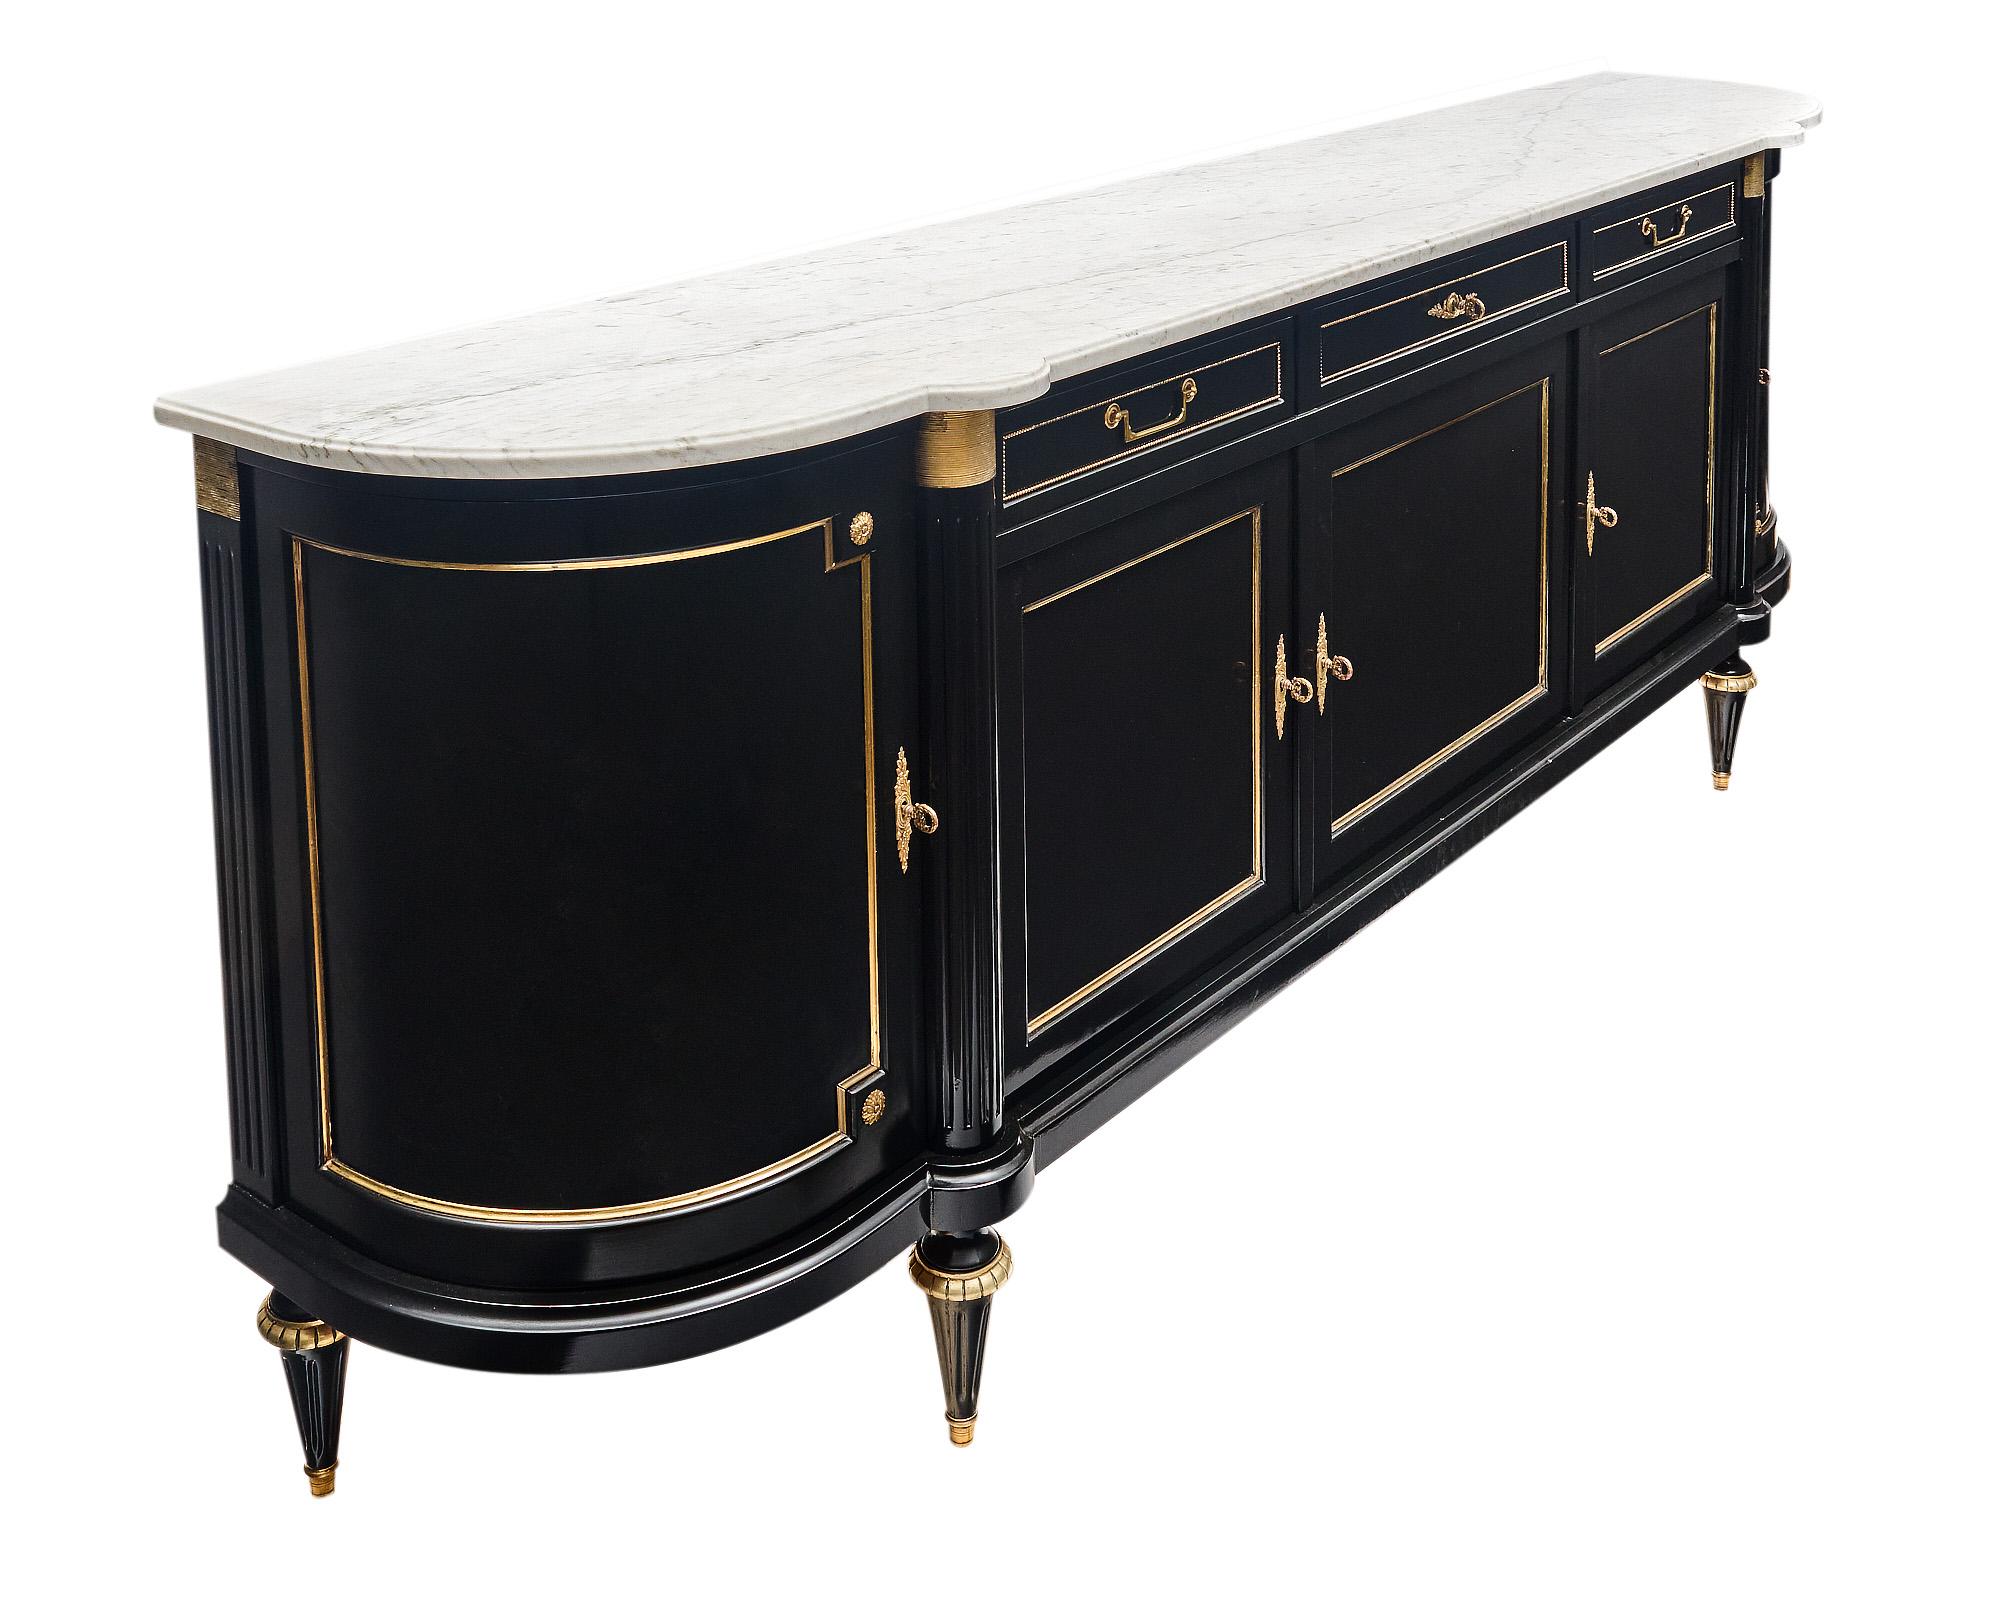 Buffet / enfilade from France made of a solid mahogany that has been finished in a museum-quality French polish for a lustrous effect. There are five doors that open to interior shelving and three dovetailed drawers. The buffet features gilt brass